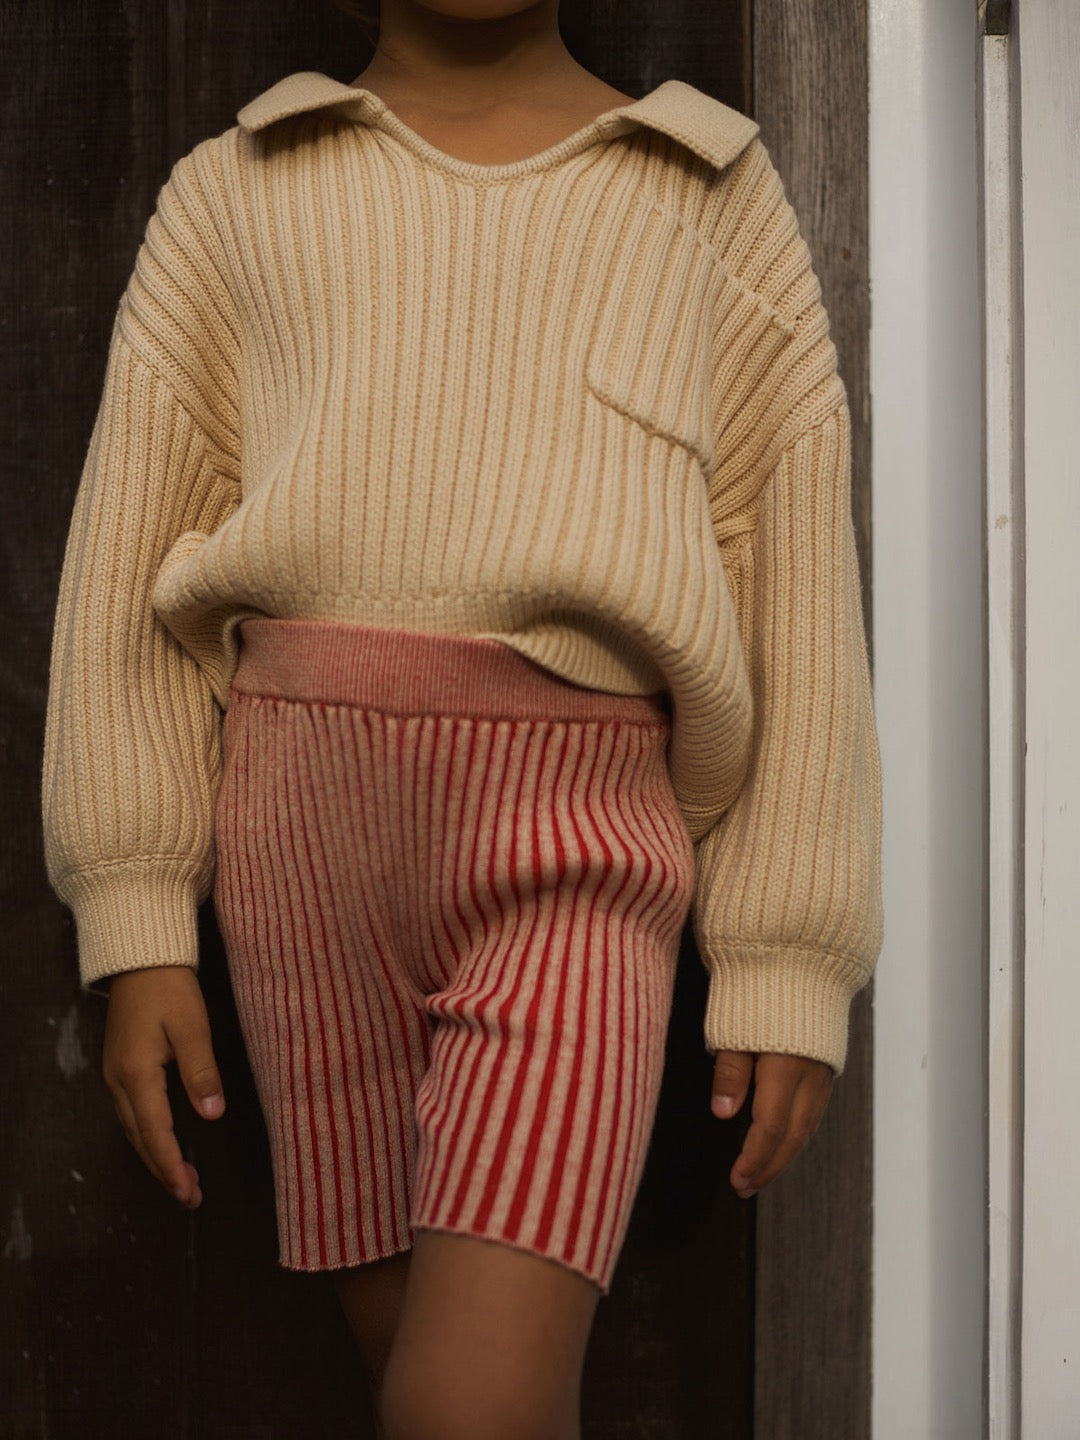 A young girl wearing a beige sweater and Rue Short – Red Multi striped shorts from SUNNA STUDIOS.